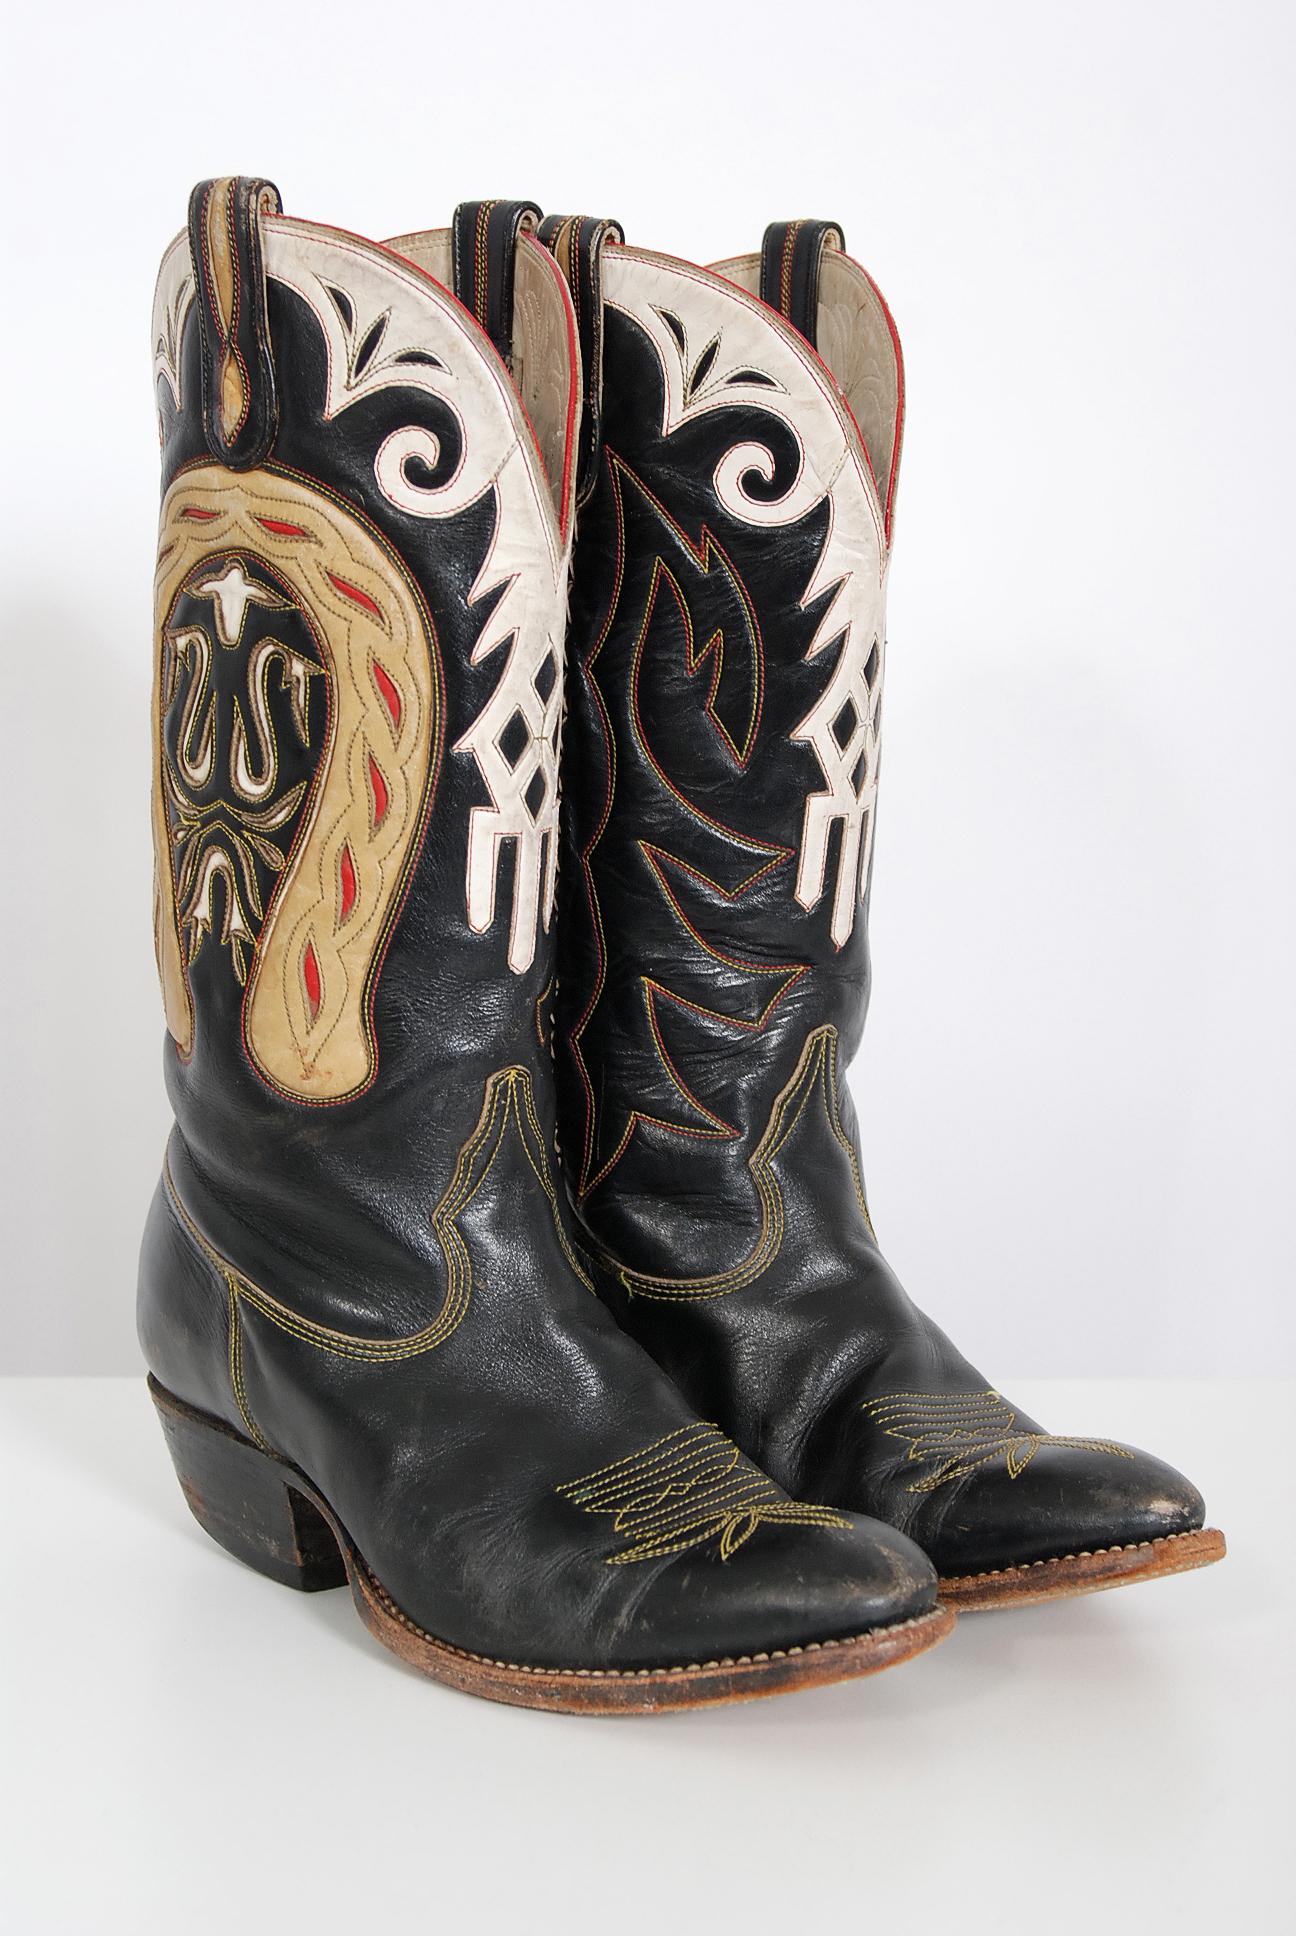 Gorgeous novelty lucky horseshoe leather boots dating back to the early 1970's. The Don Quijote boot company was started in 1926 with the interest in developing high quality shoes that would last. He started exporting post World War II, being one of